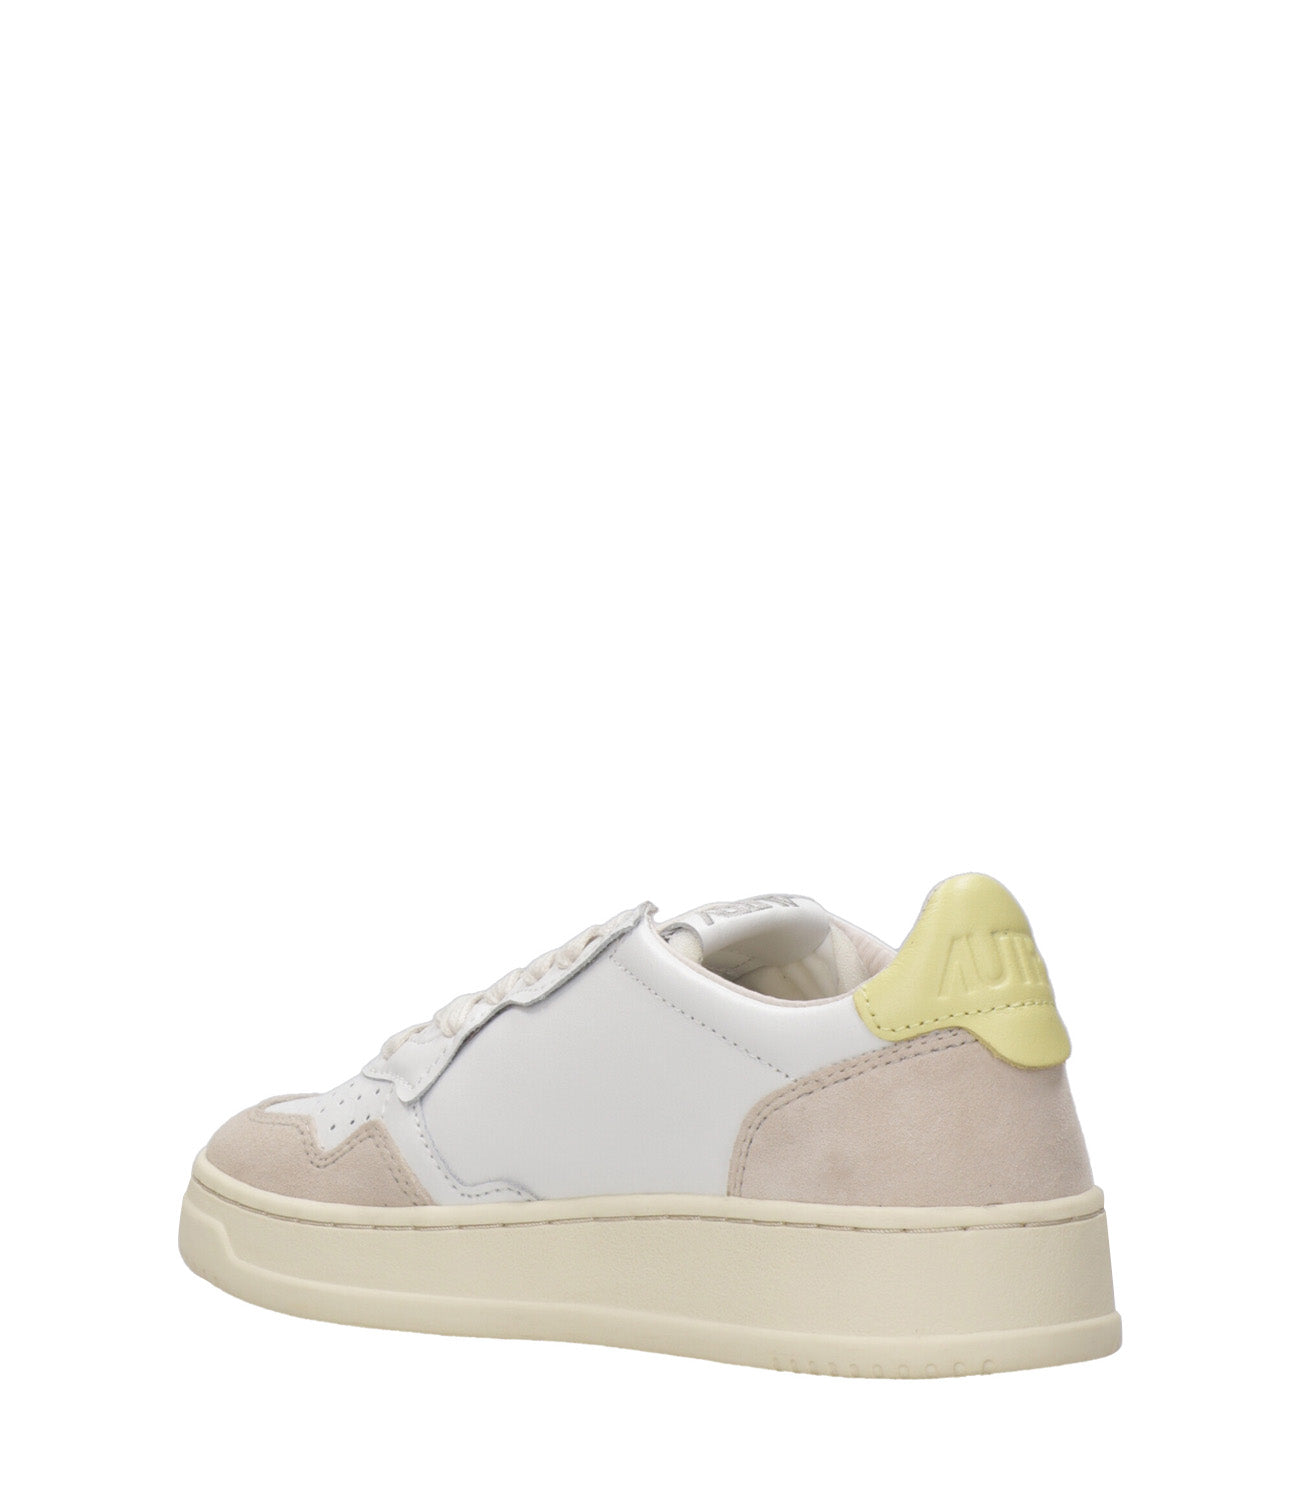 Autry | Medalist Low White and Yellow Sneakers